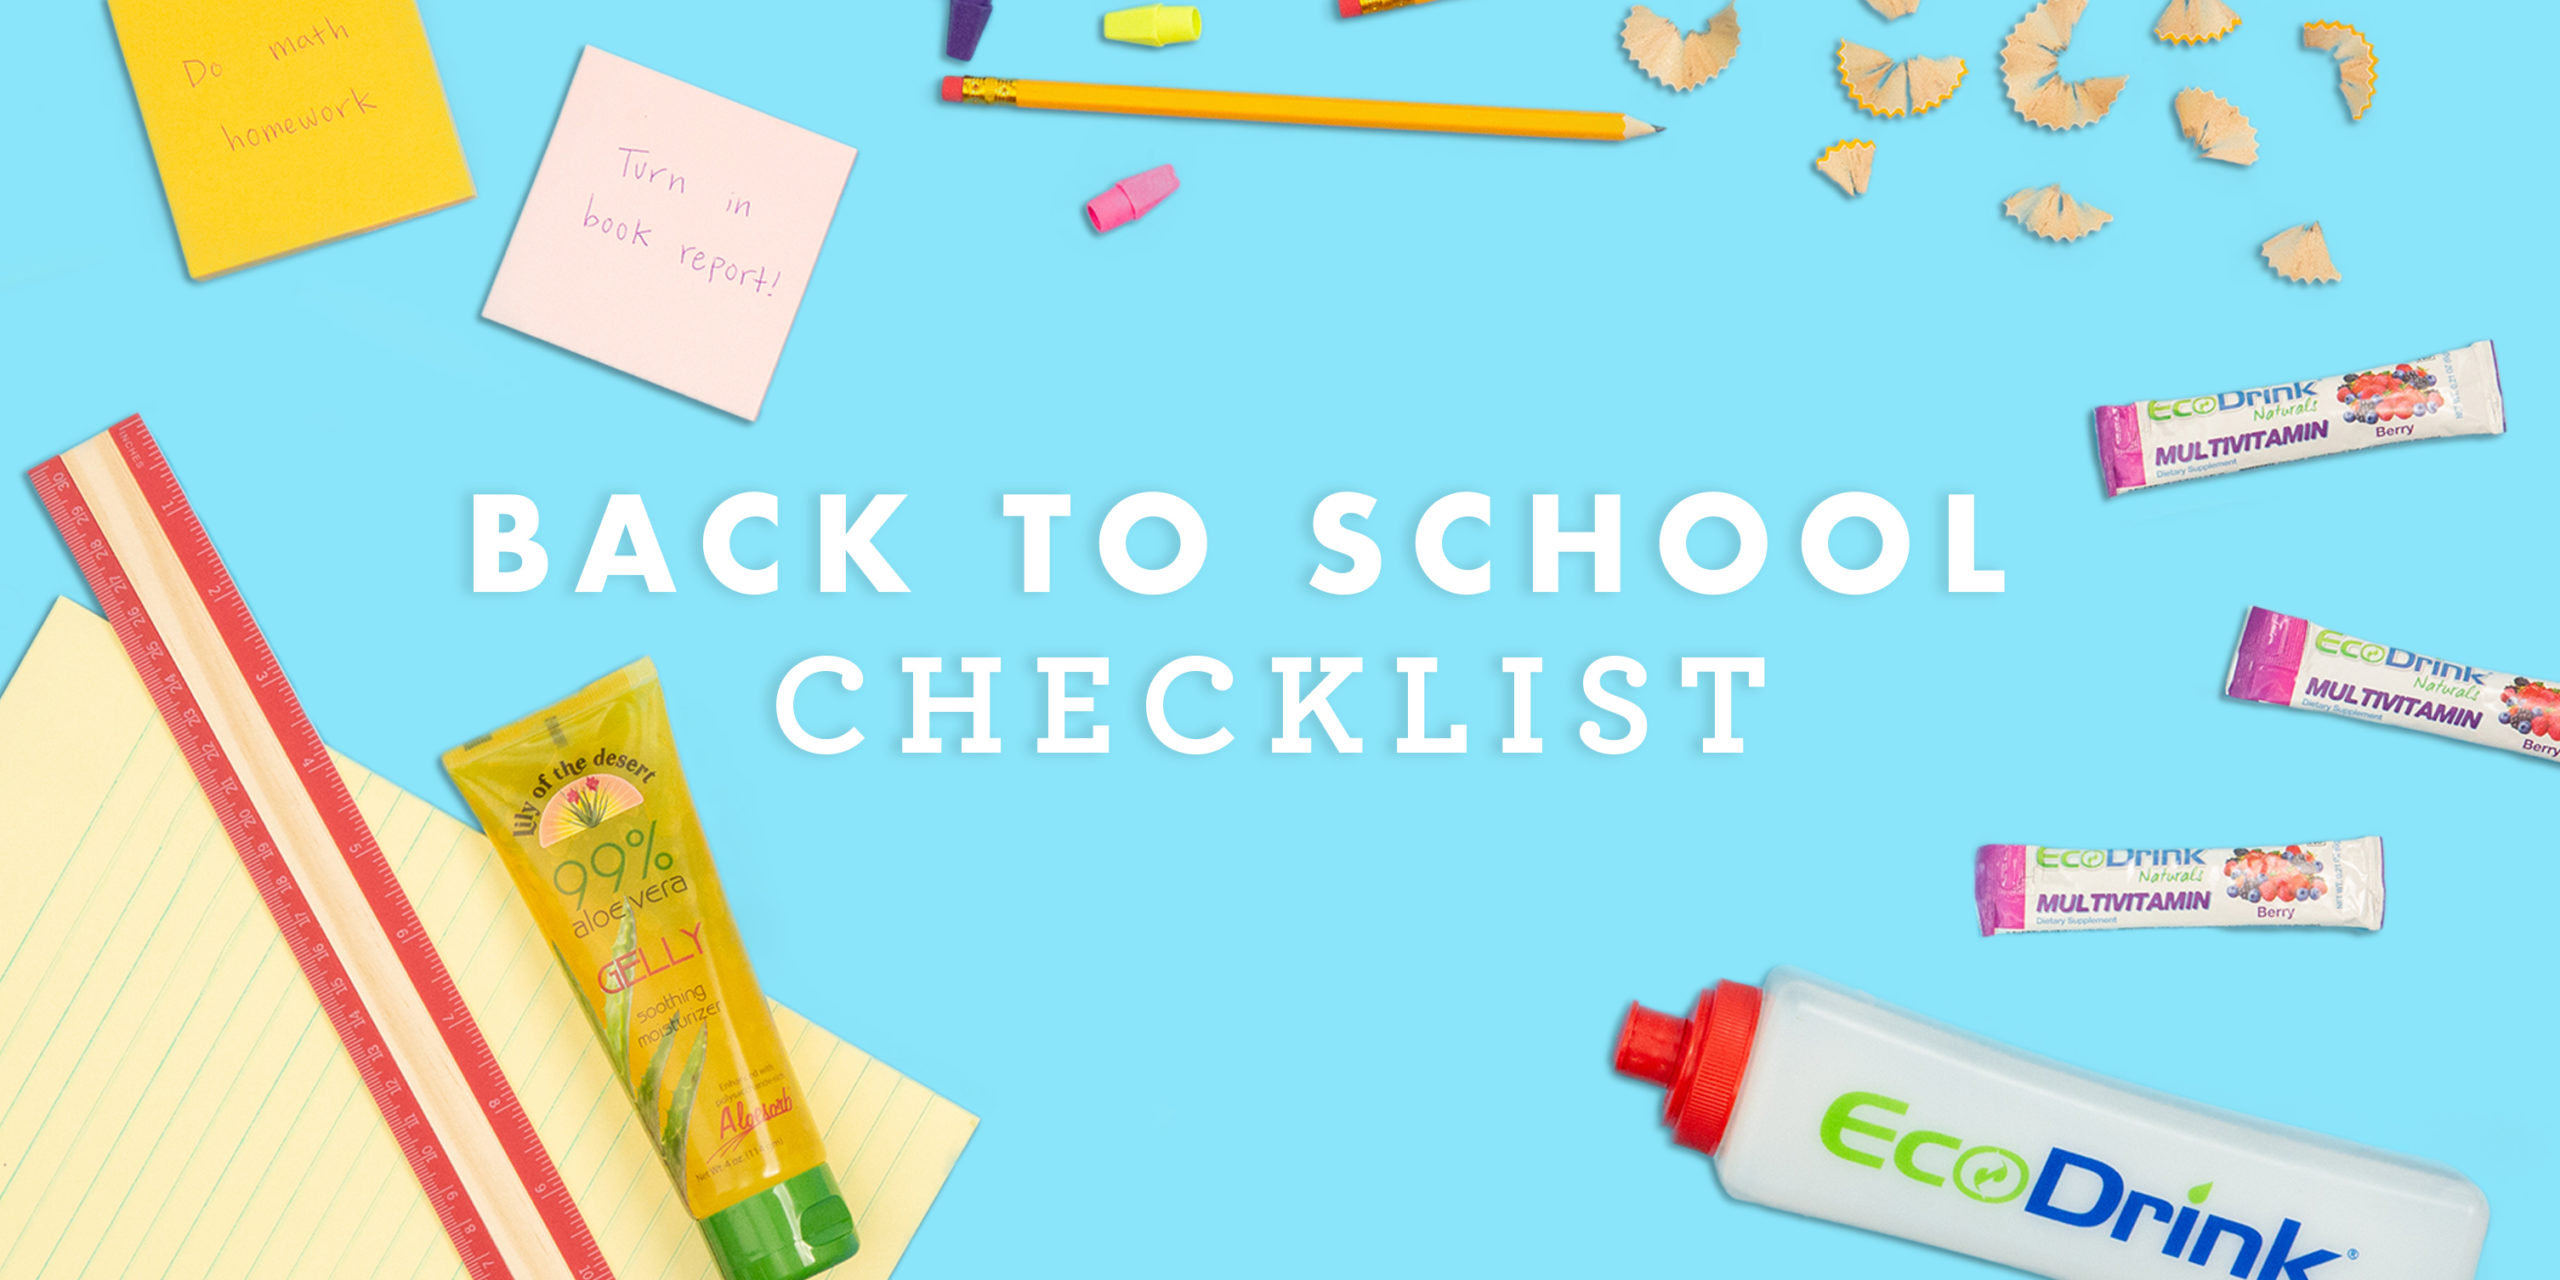 Back to School Checklist | Lily of the Desert